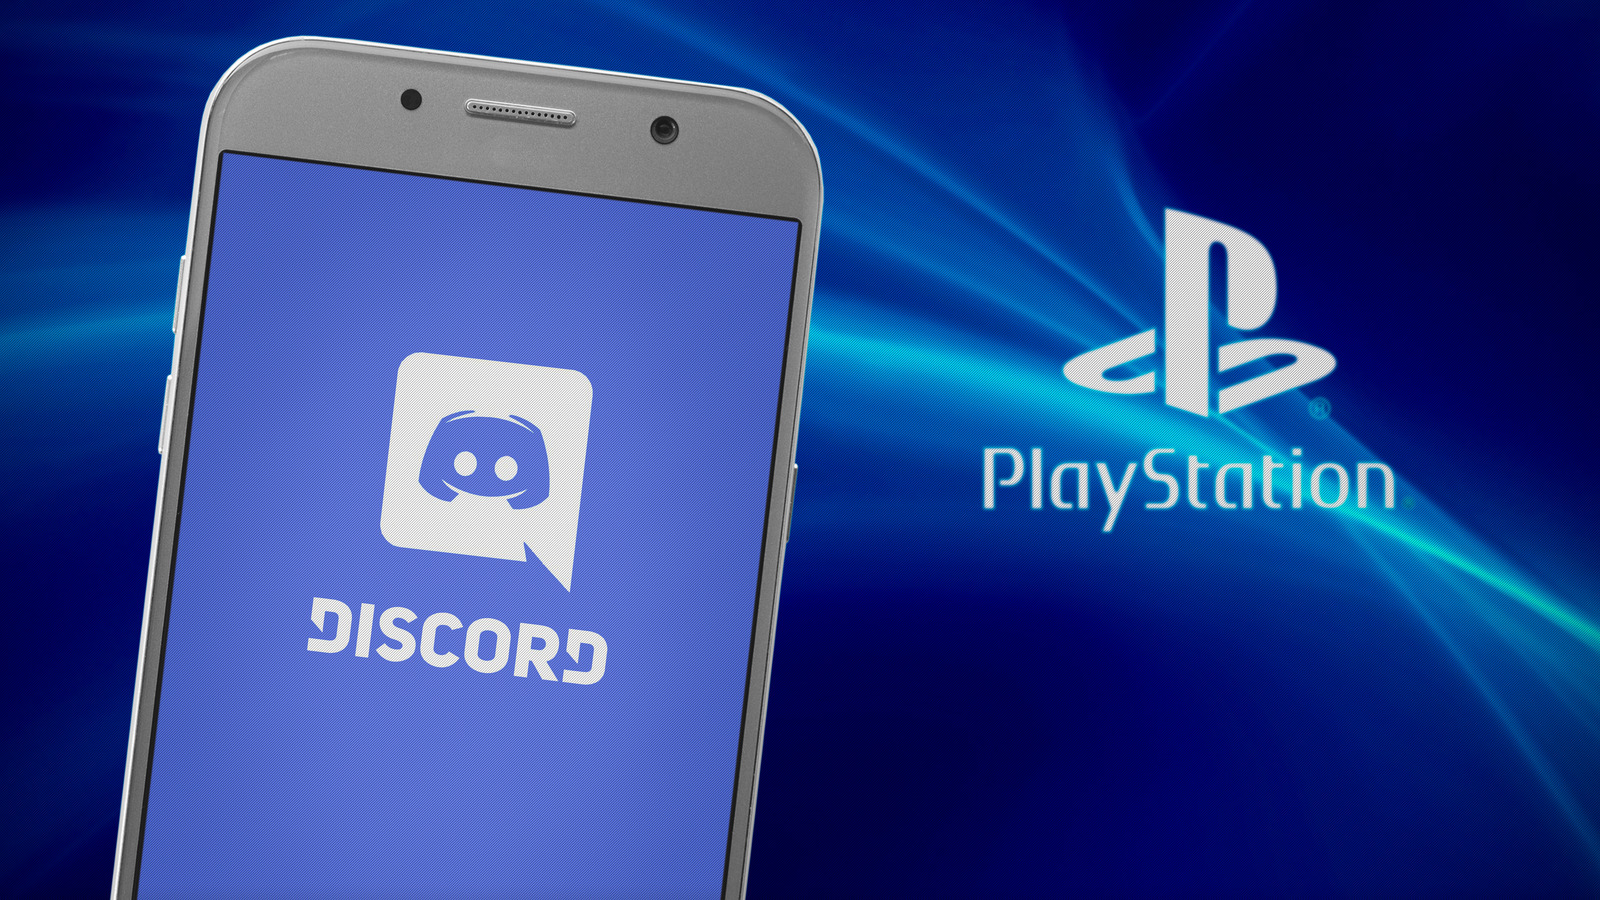 How To Stream On Discord